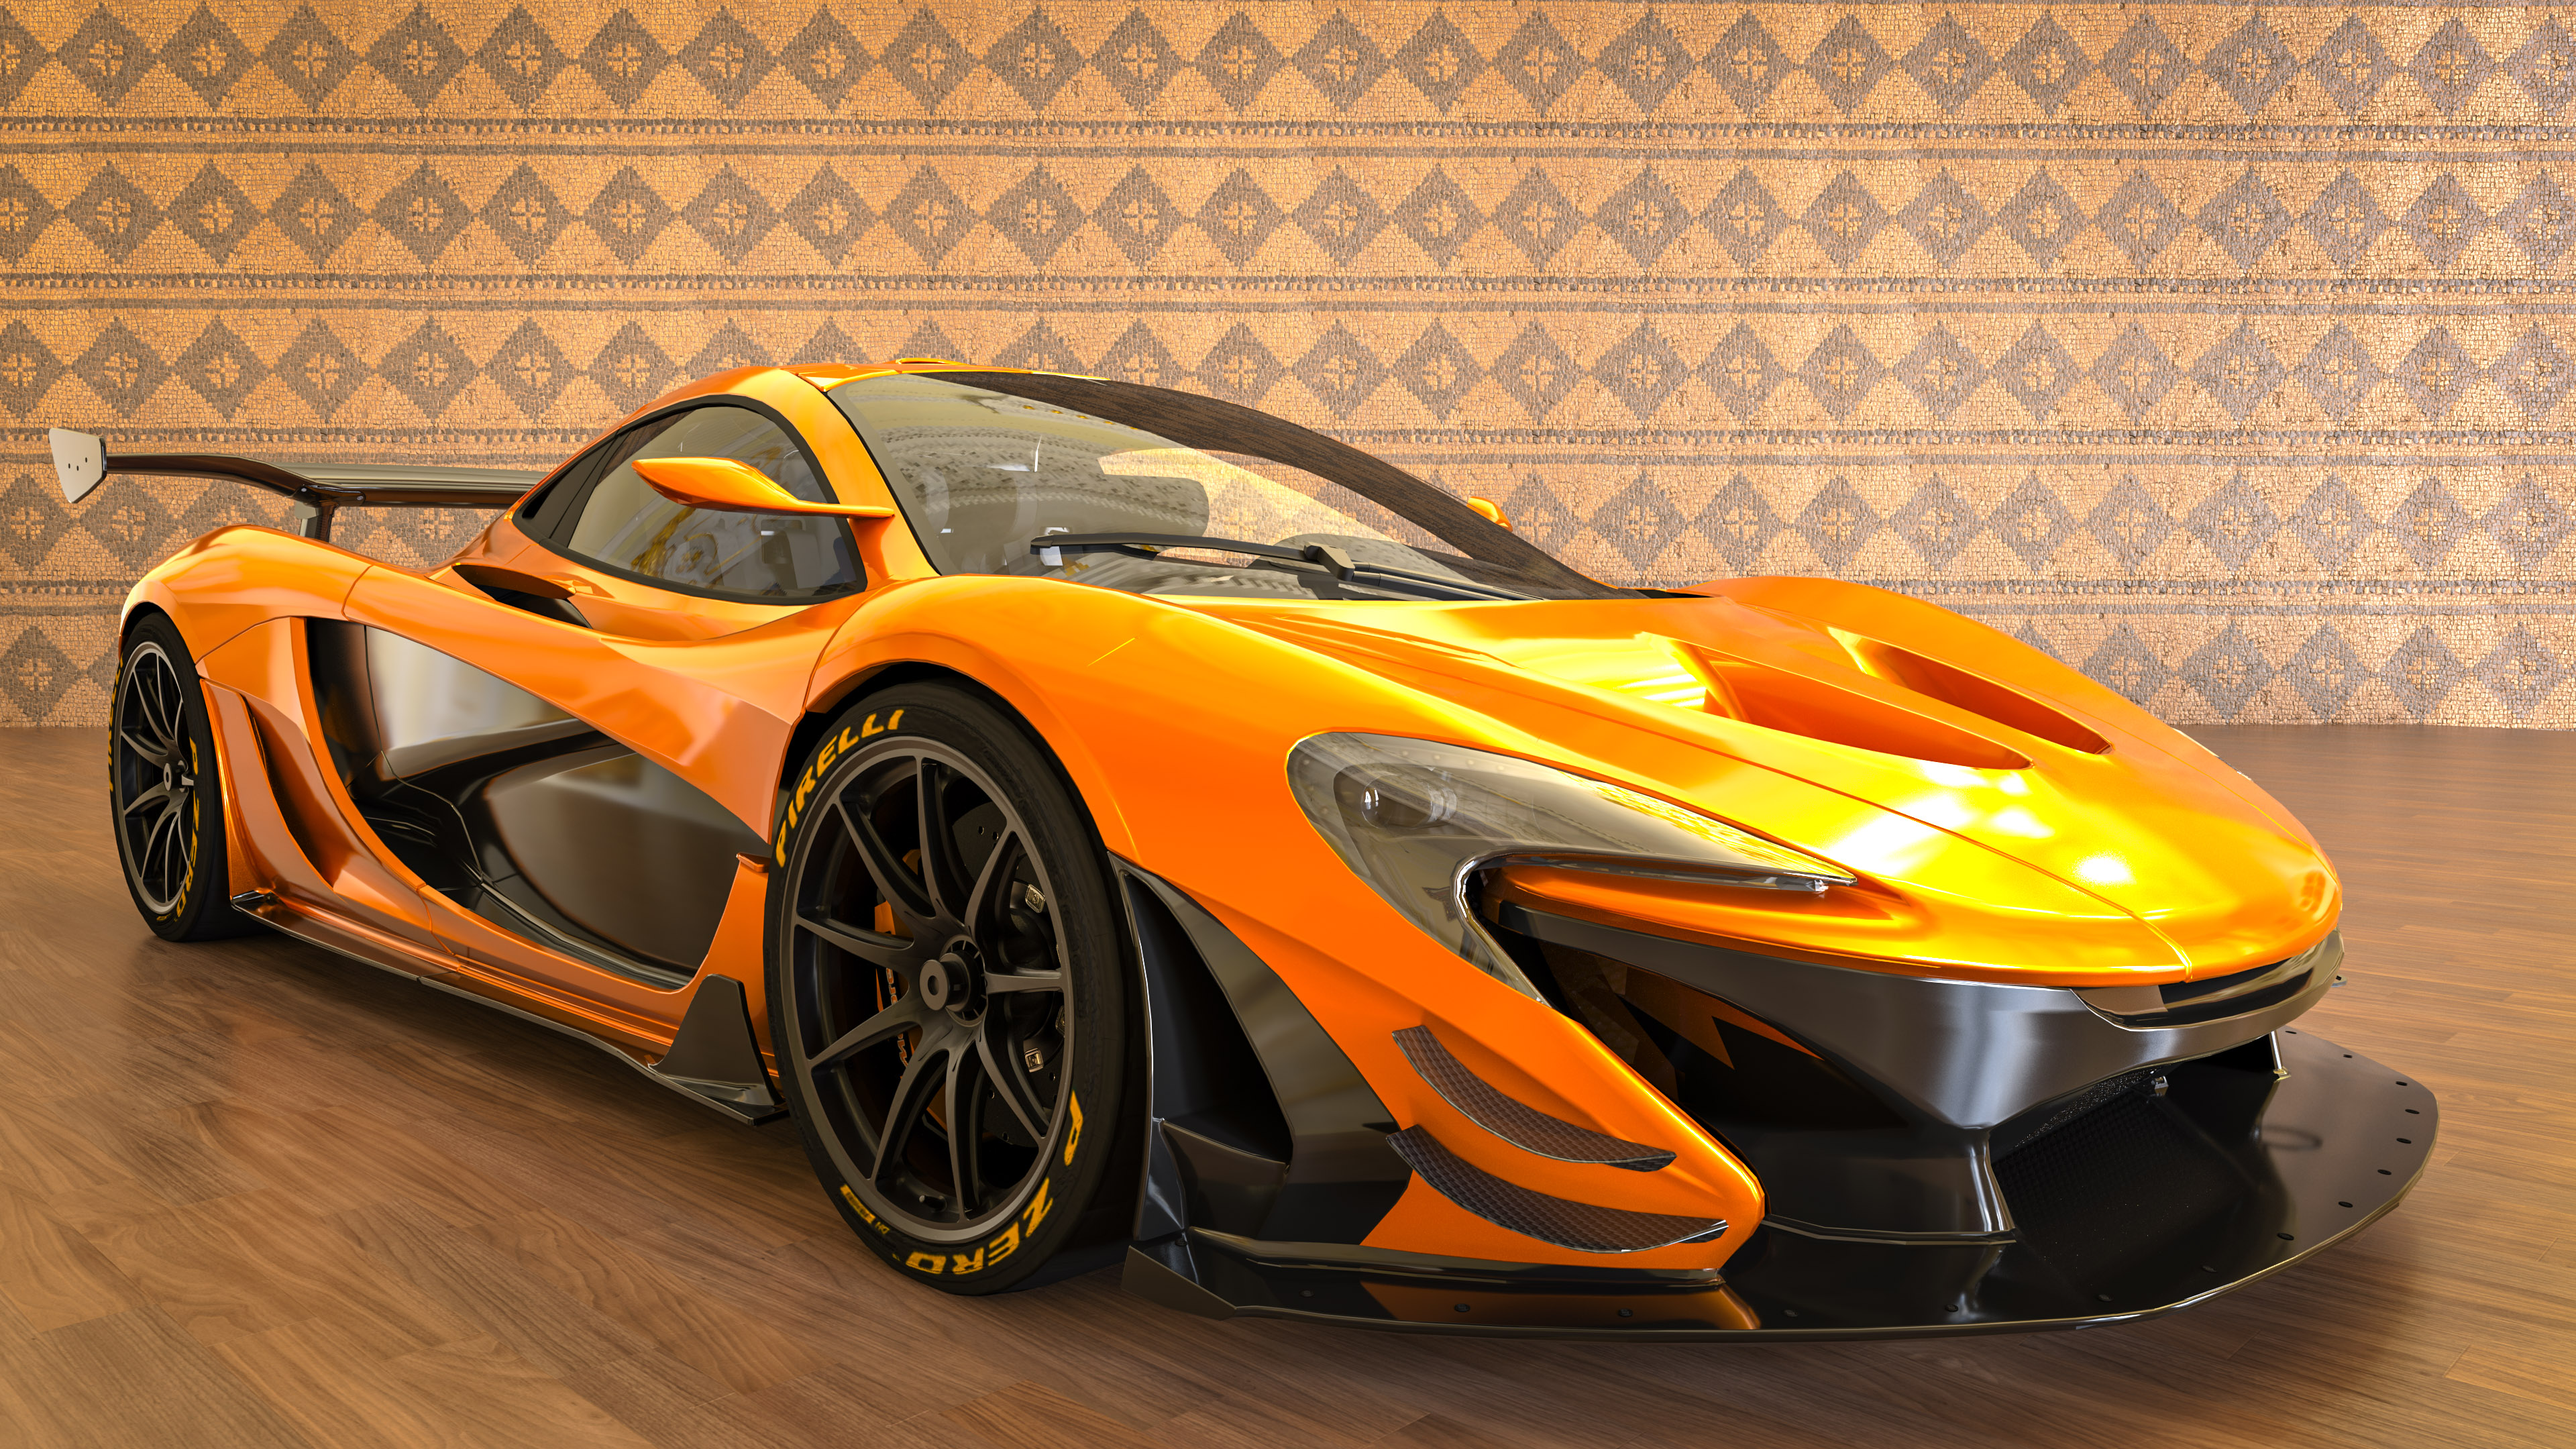 Experience the speed and power of McLaren P1 GTR with our exclusive car wallpaper 4K for PC, delivering an unparalleled visual treat.